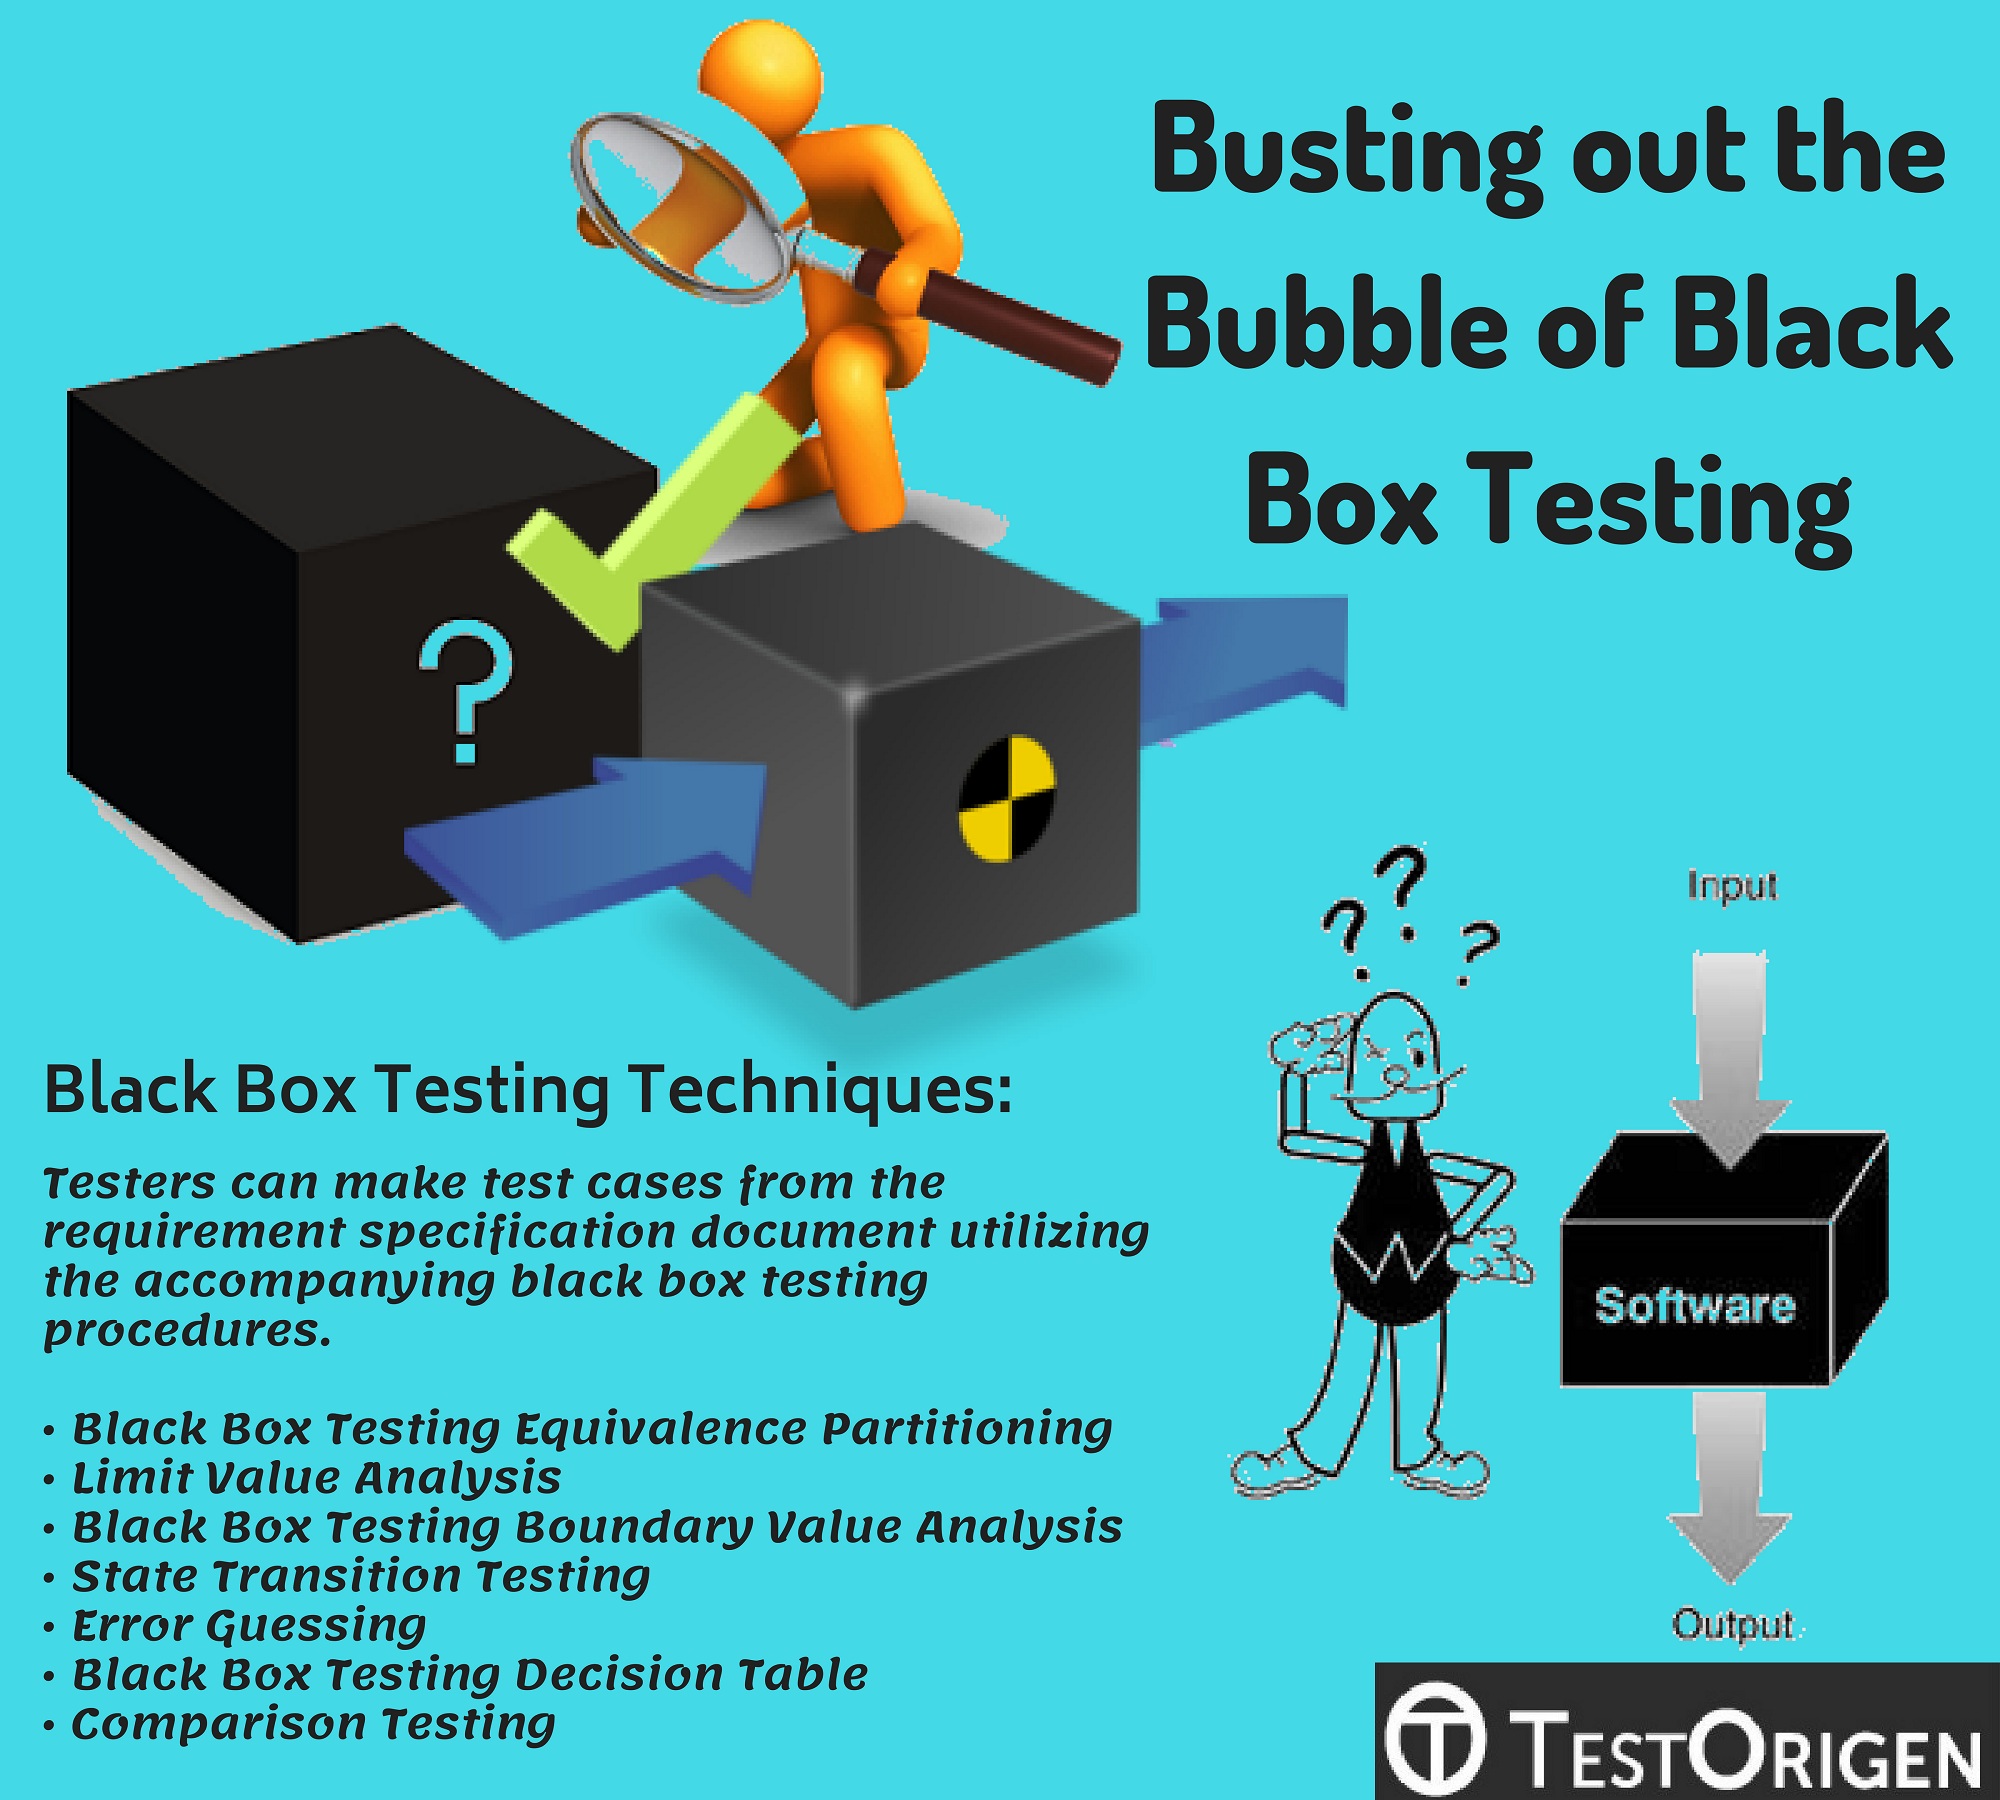 Busting out the Bubble of Black Box Testing